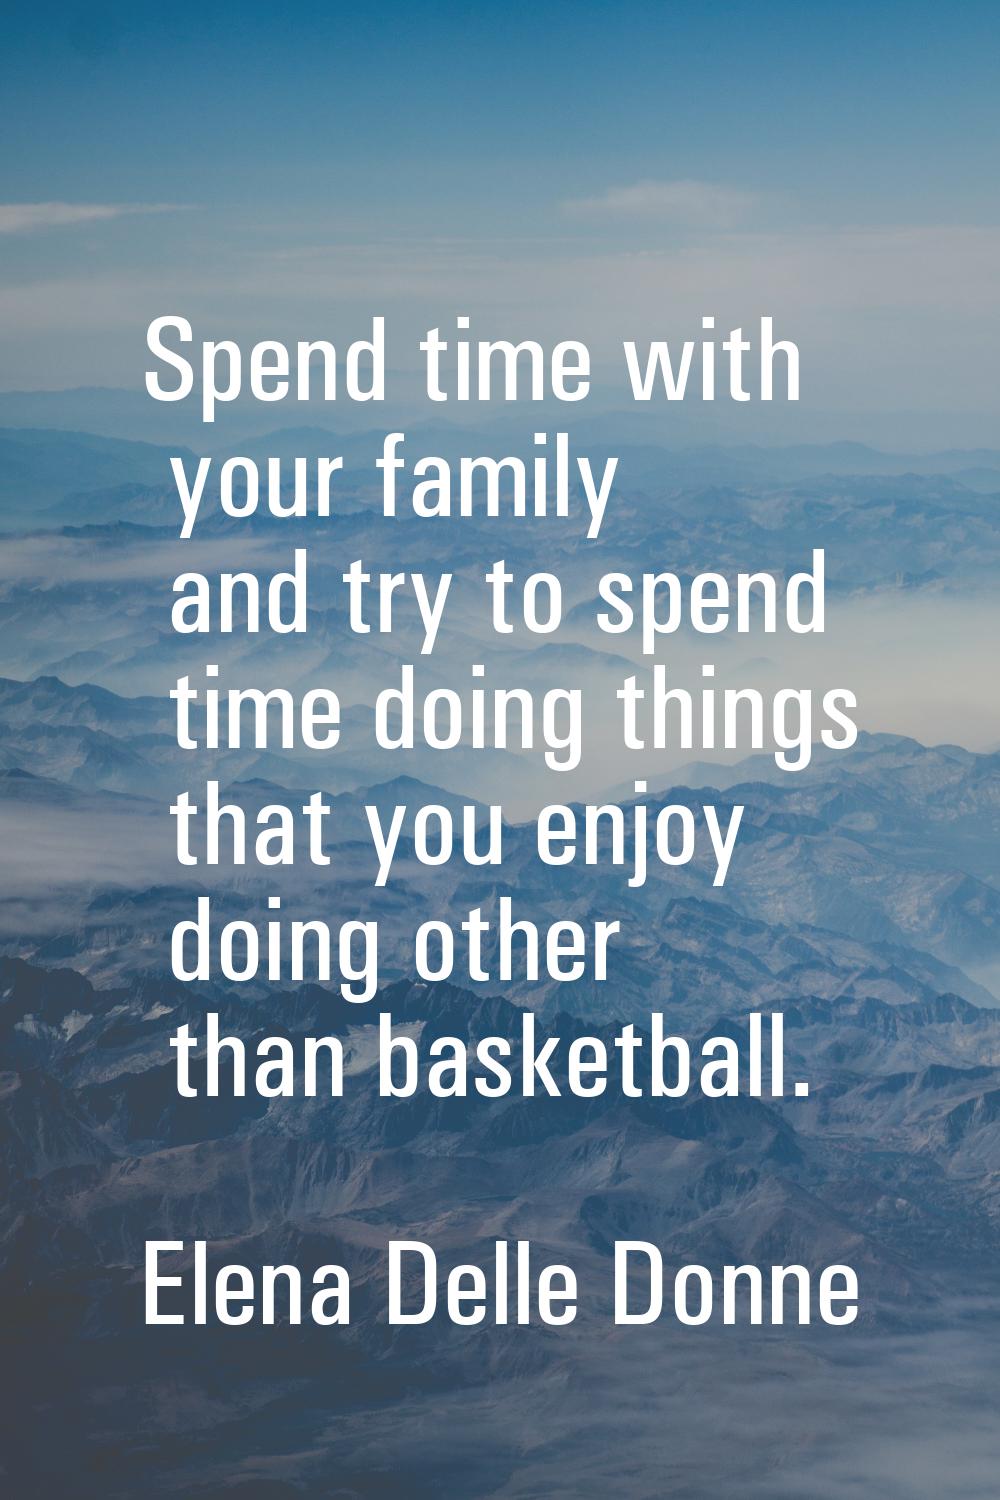 Spend time with your family and try to spend time doing things that you enjoy doing other than bask